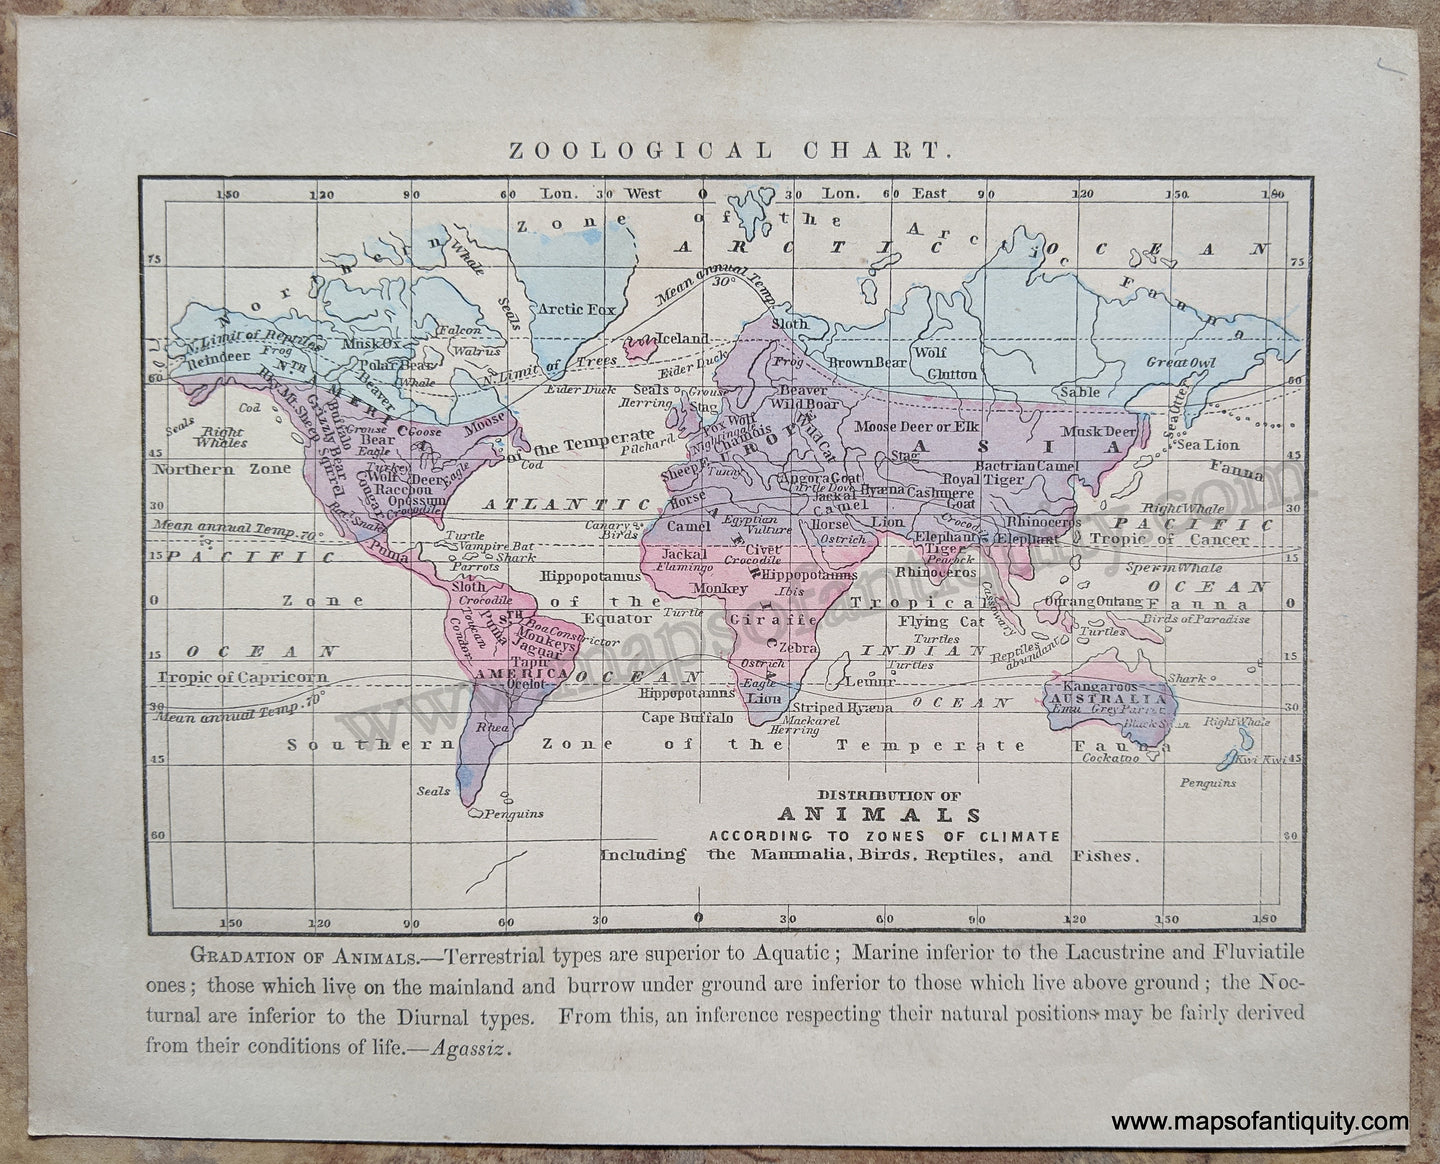 Antique-Hand-Colored-Map-Zoological-Chart-World--1857-Morse-and-Gaston-Maps-Of-Antiquity-1800s-19th-century